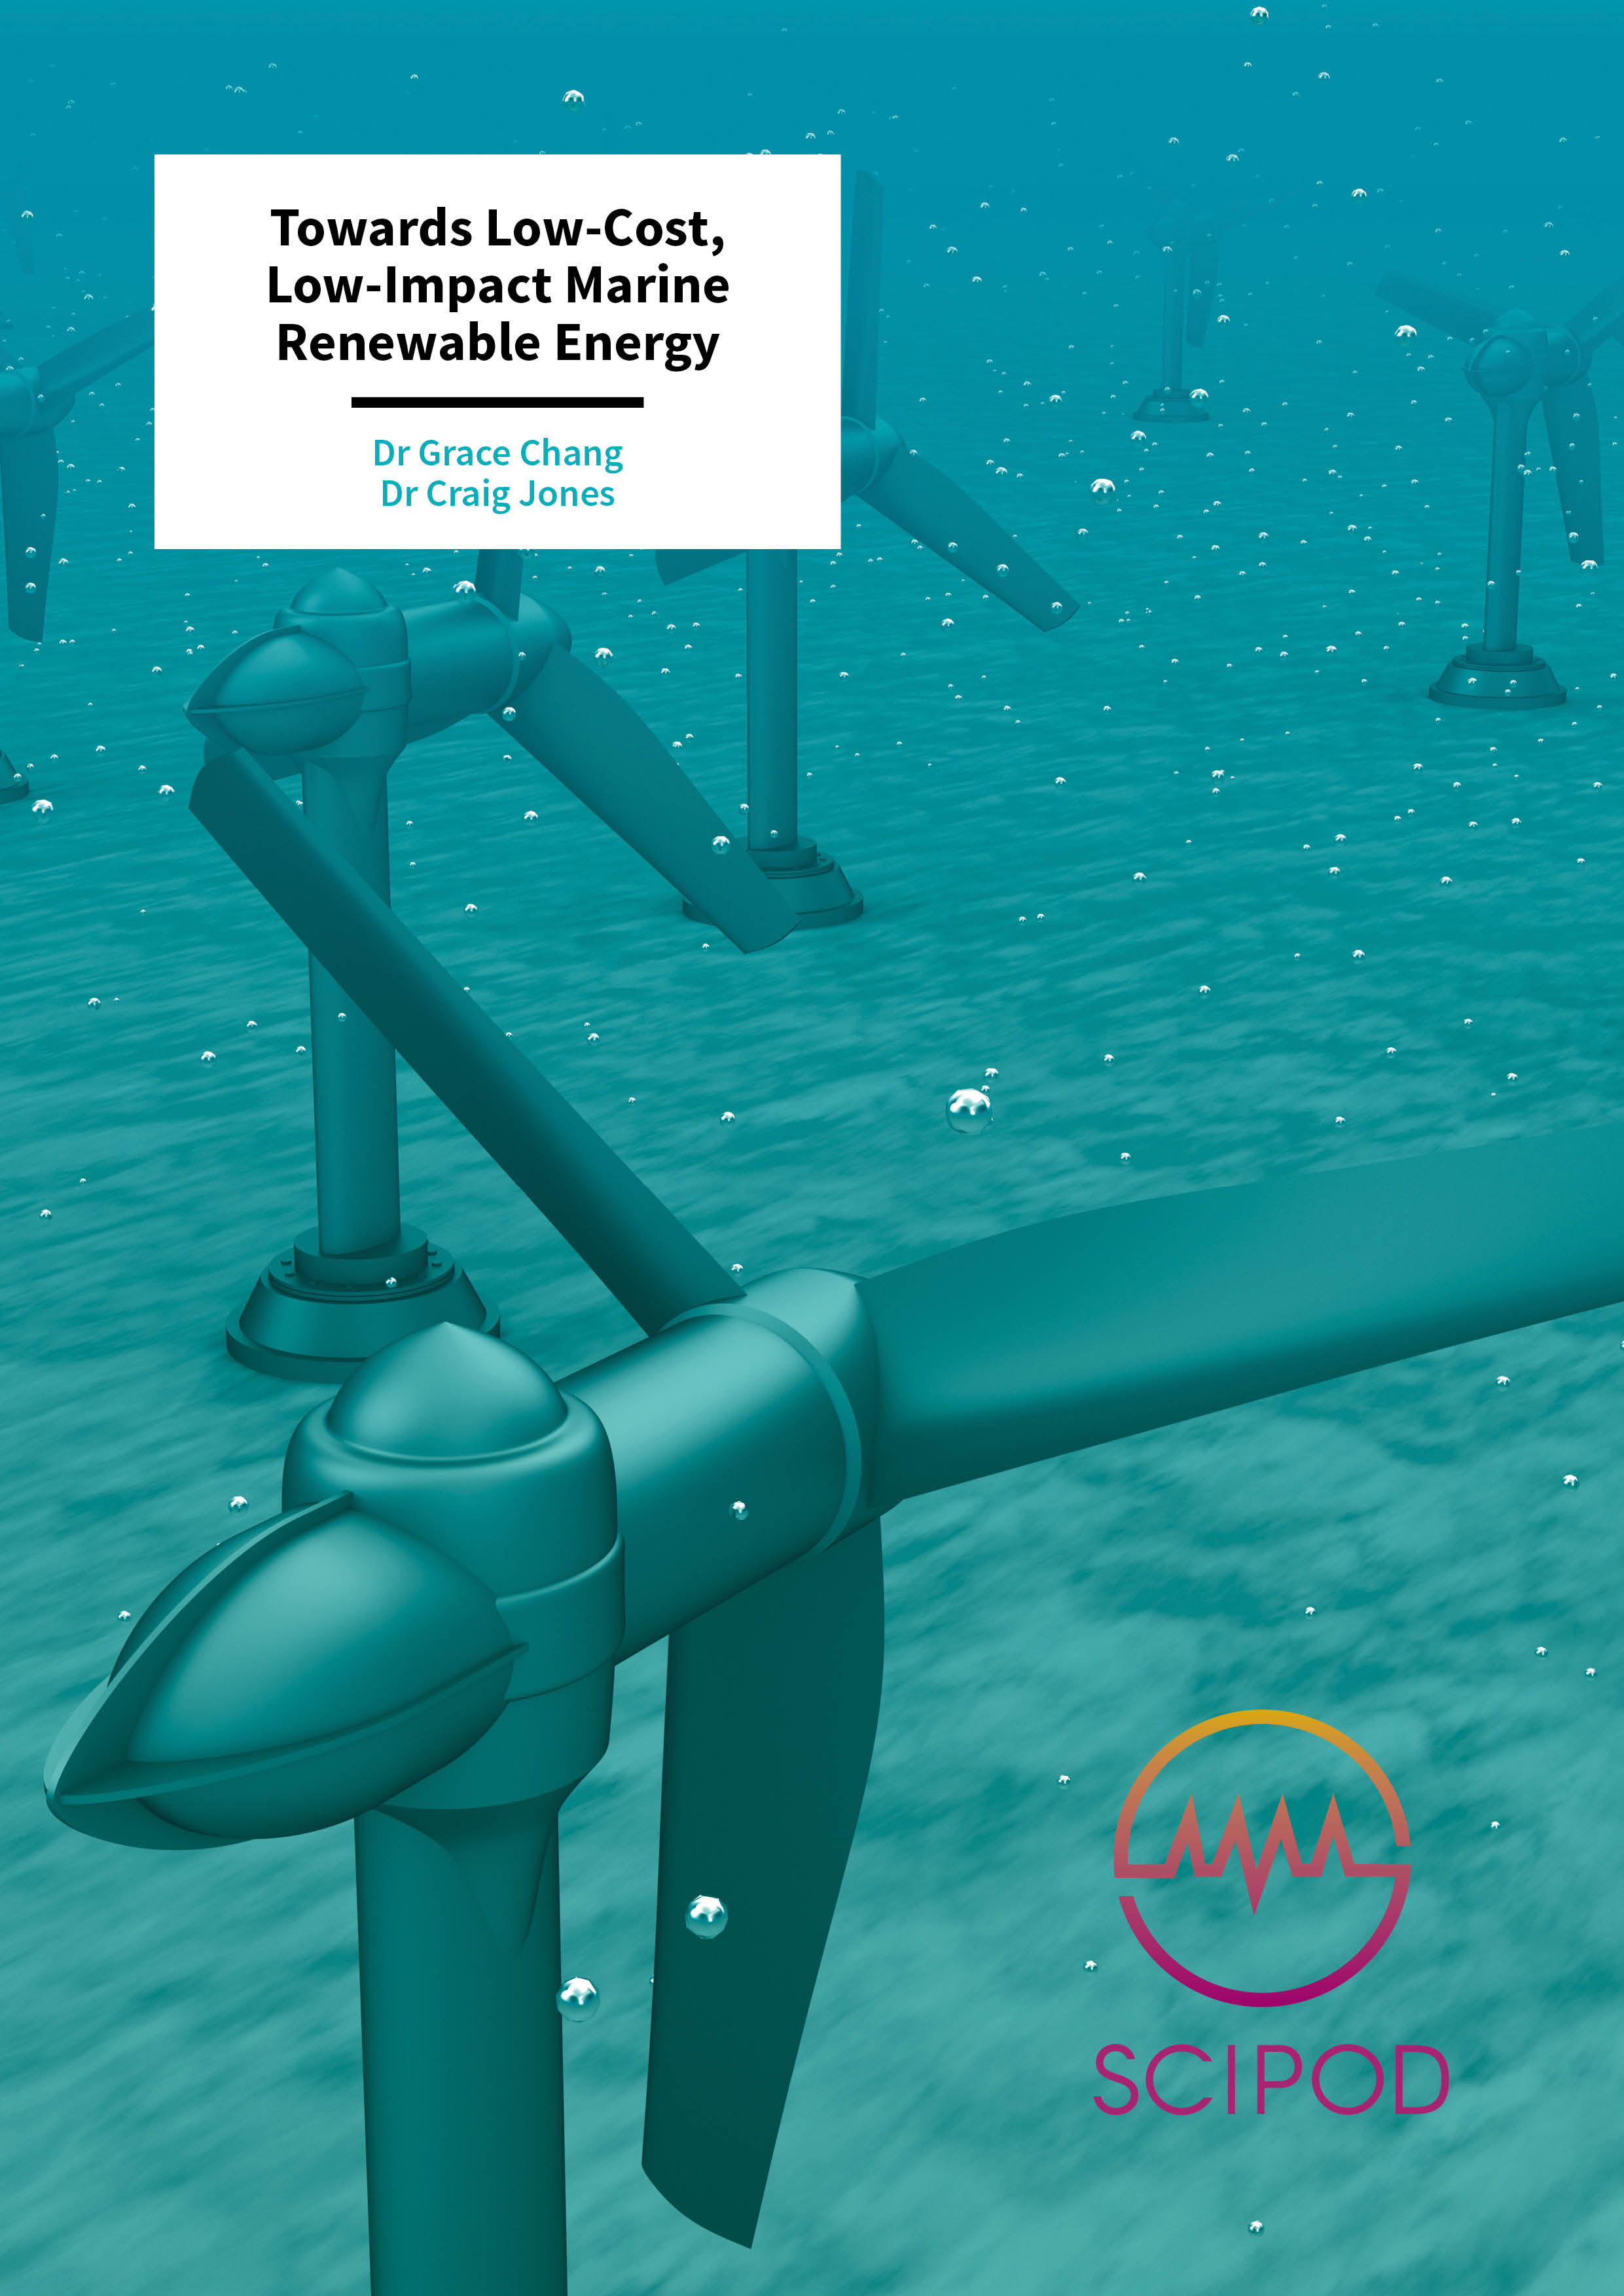 Towards Low-Cost, Low-Impact Marine Renewable Energy – Drs Grace Chang and Craig Jones, Integral Consulting Inc.